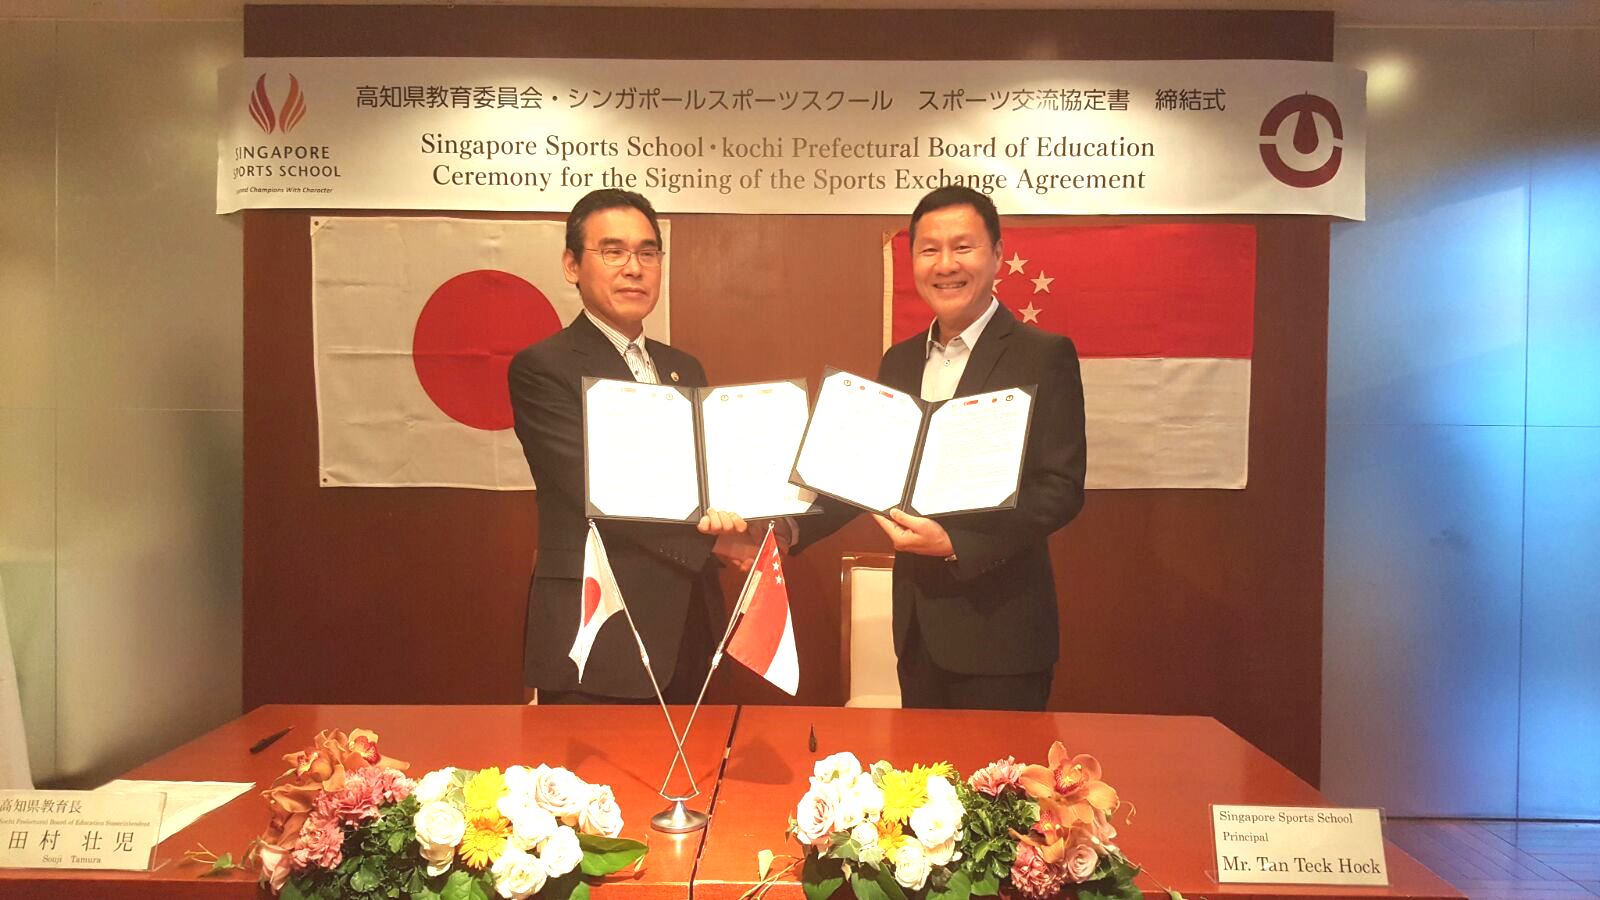 SSP-Kochi Prefectural Board of Education MOU Signing 17oct16 Lo-Res.jpg